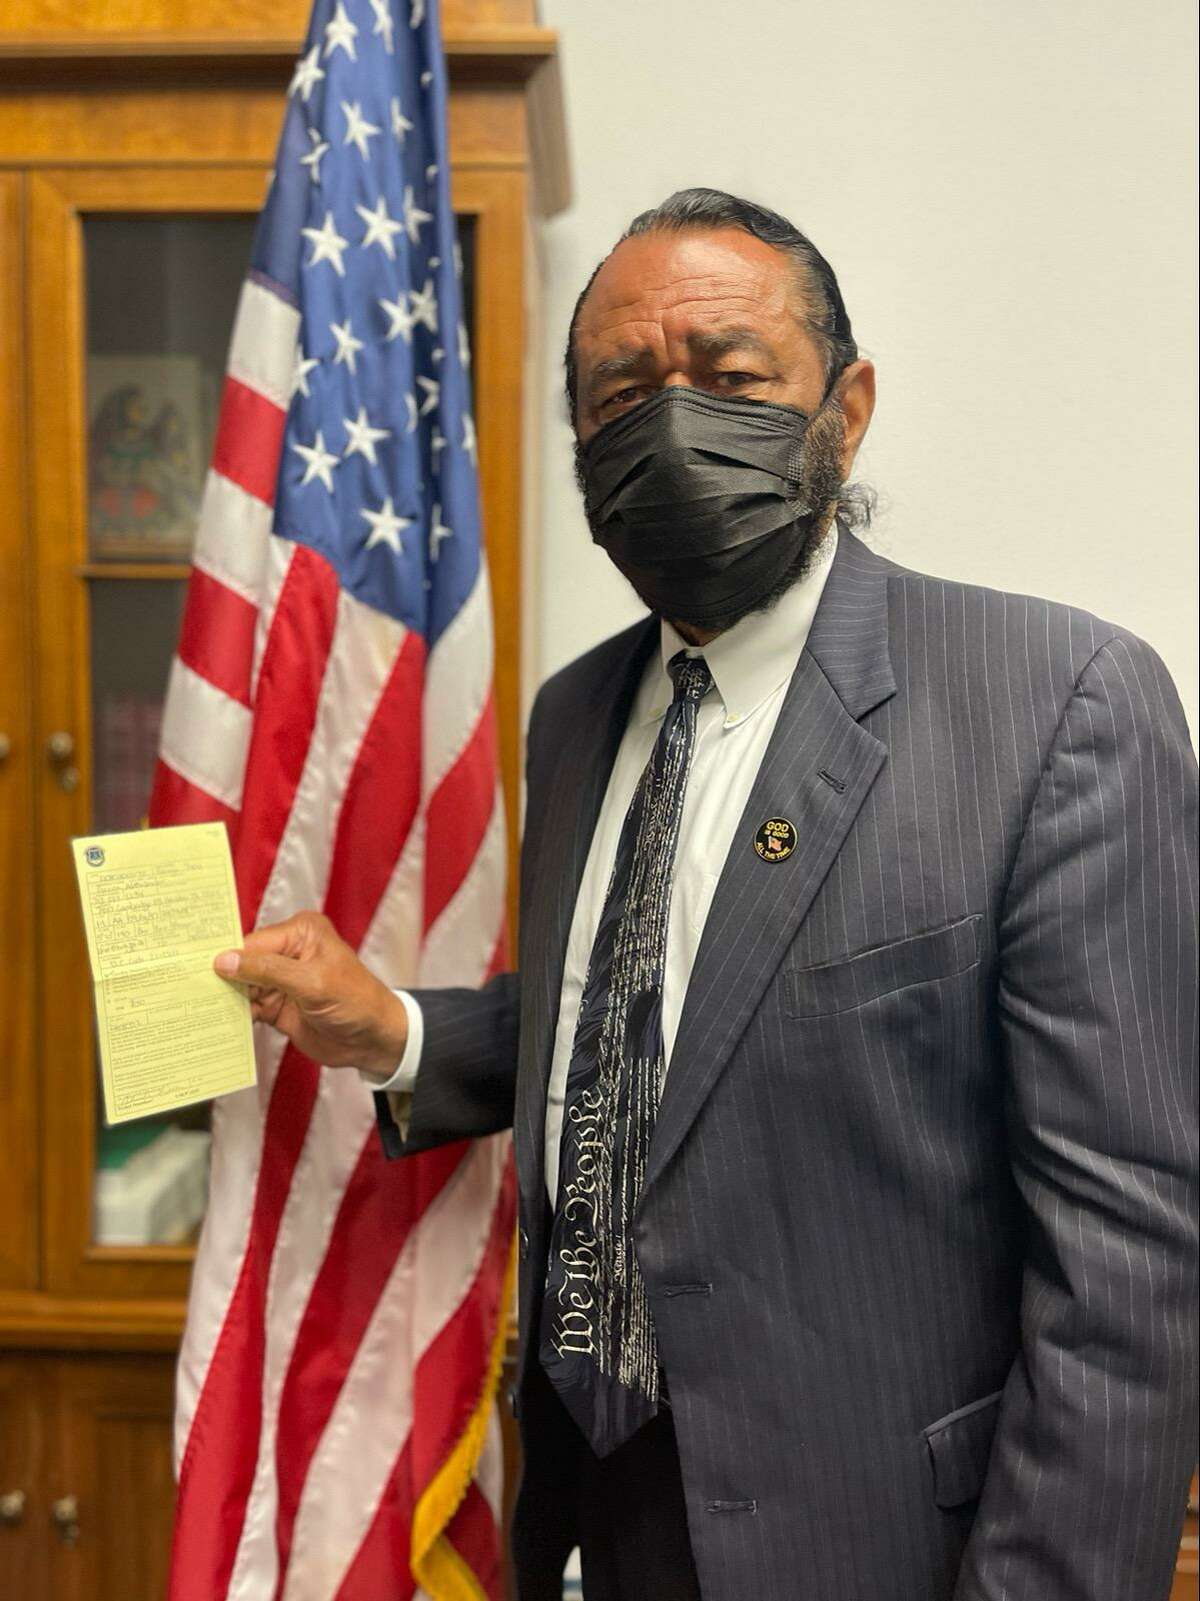 U.S. Rep. Al Green, D-Texas, holds up the citation he received after being arrested for civil disobedience while protesting voter suppression.